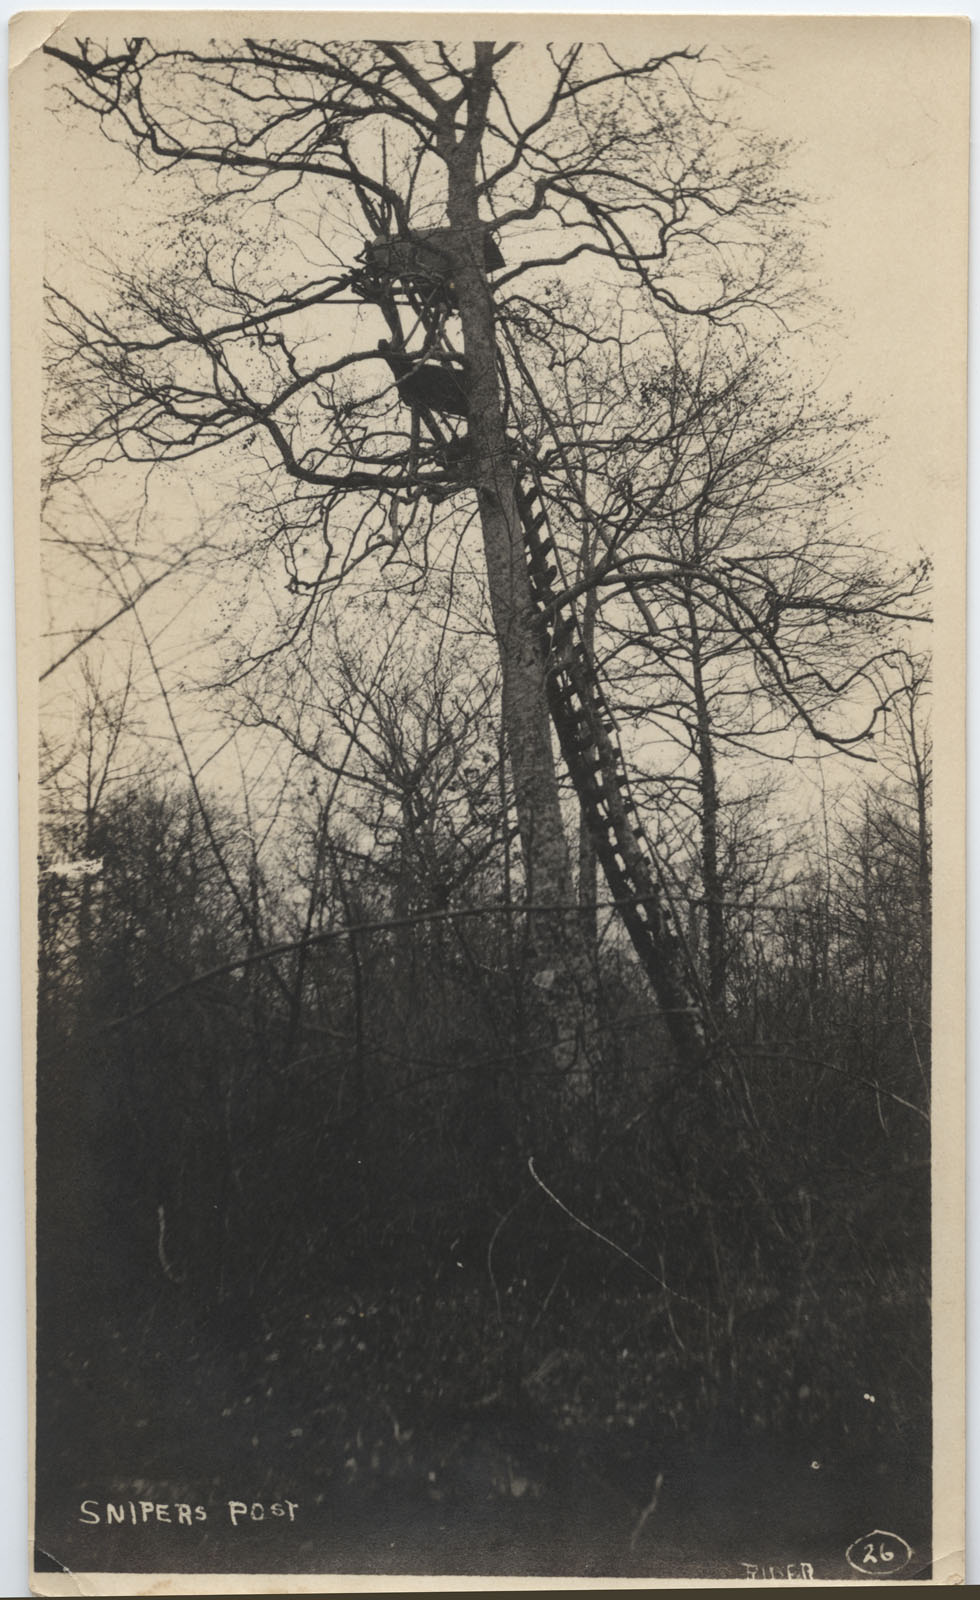 Sepia photograph of a tree with a platform high in its branches, with a ladder leading to the platform